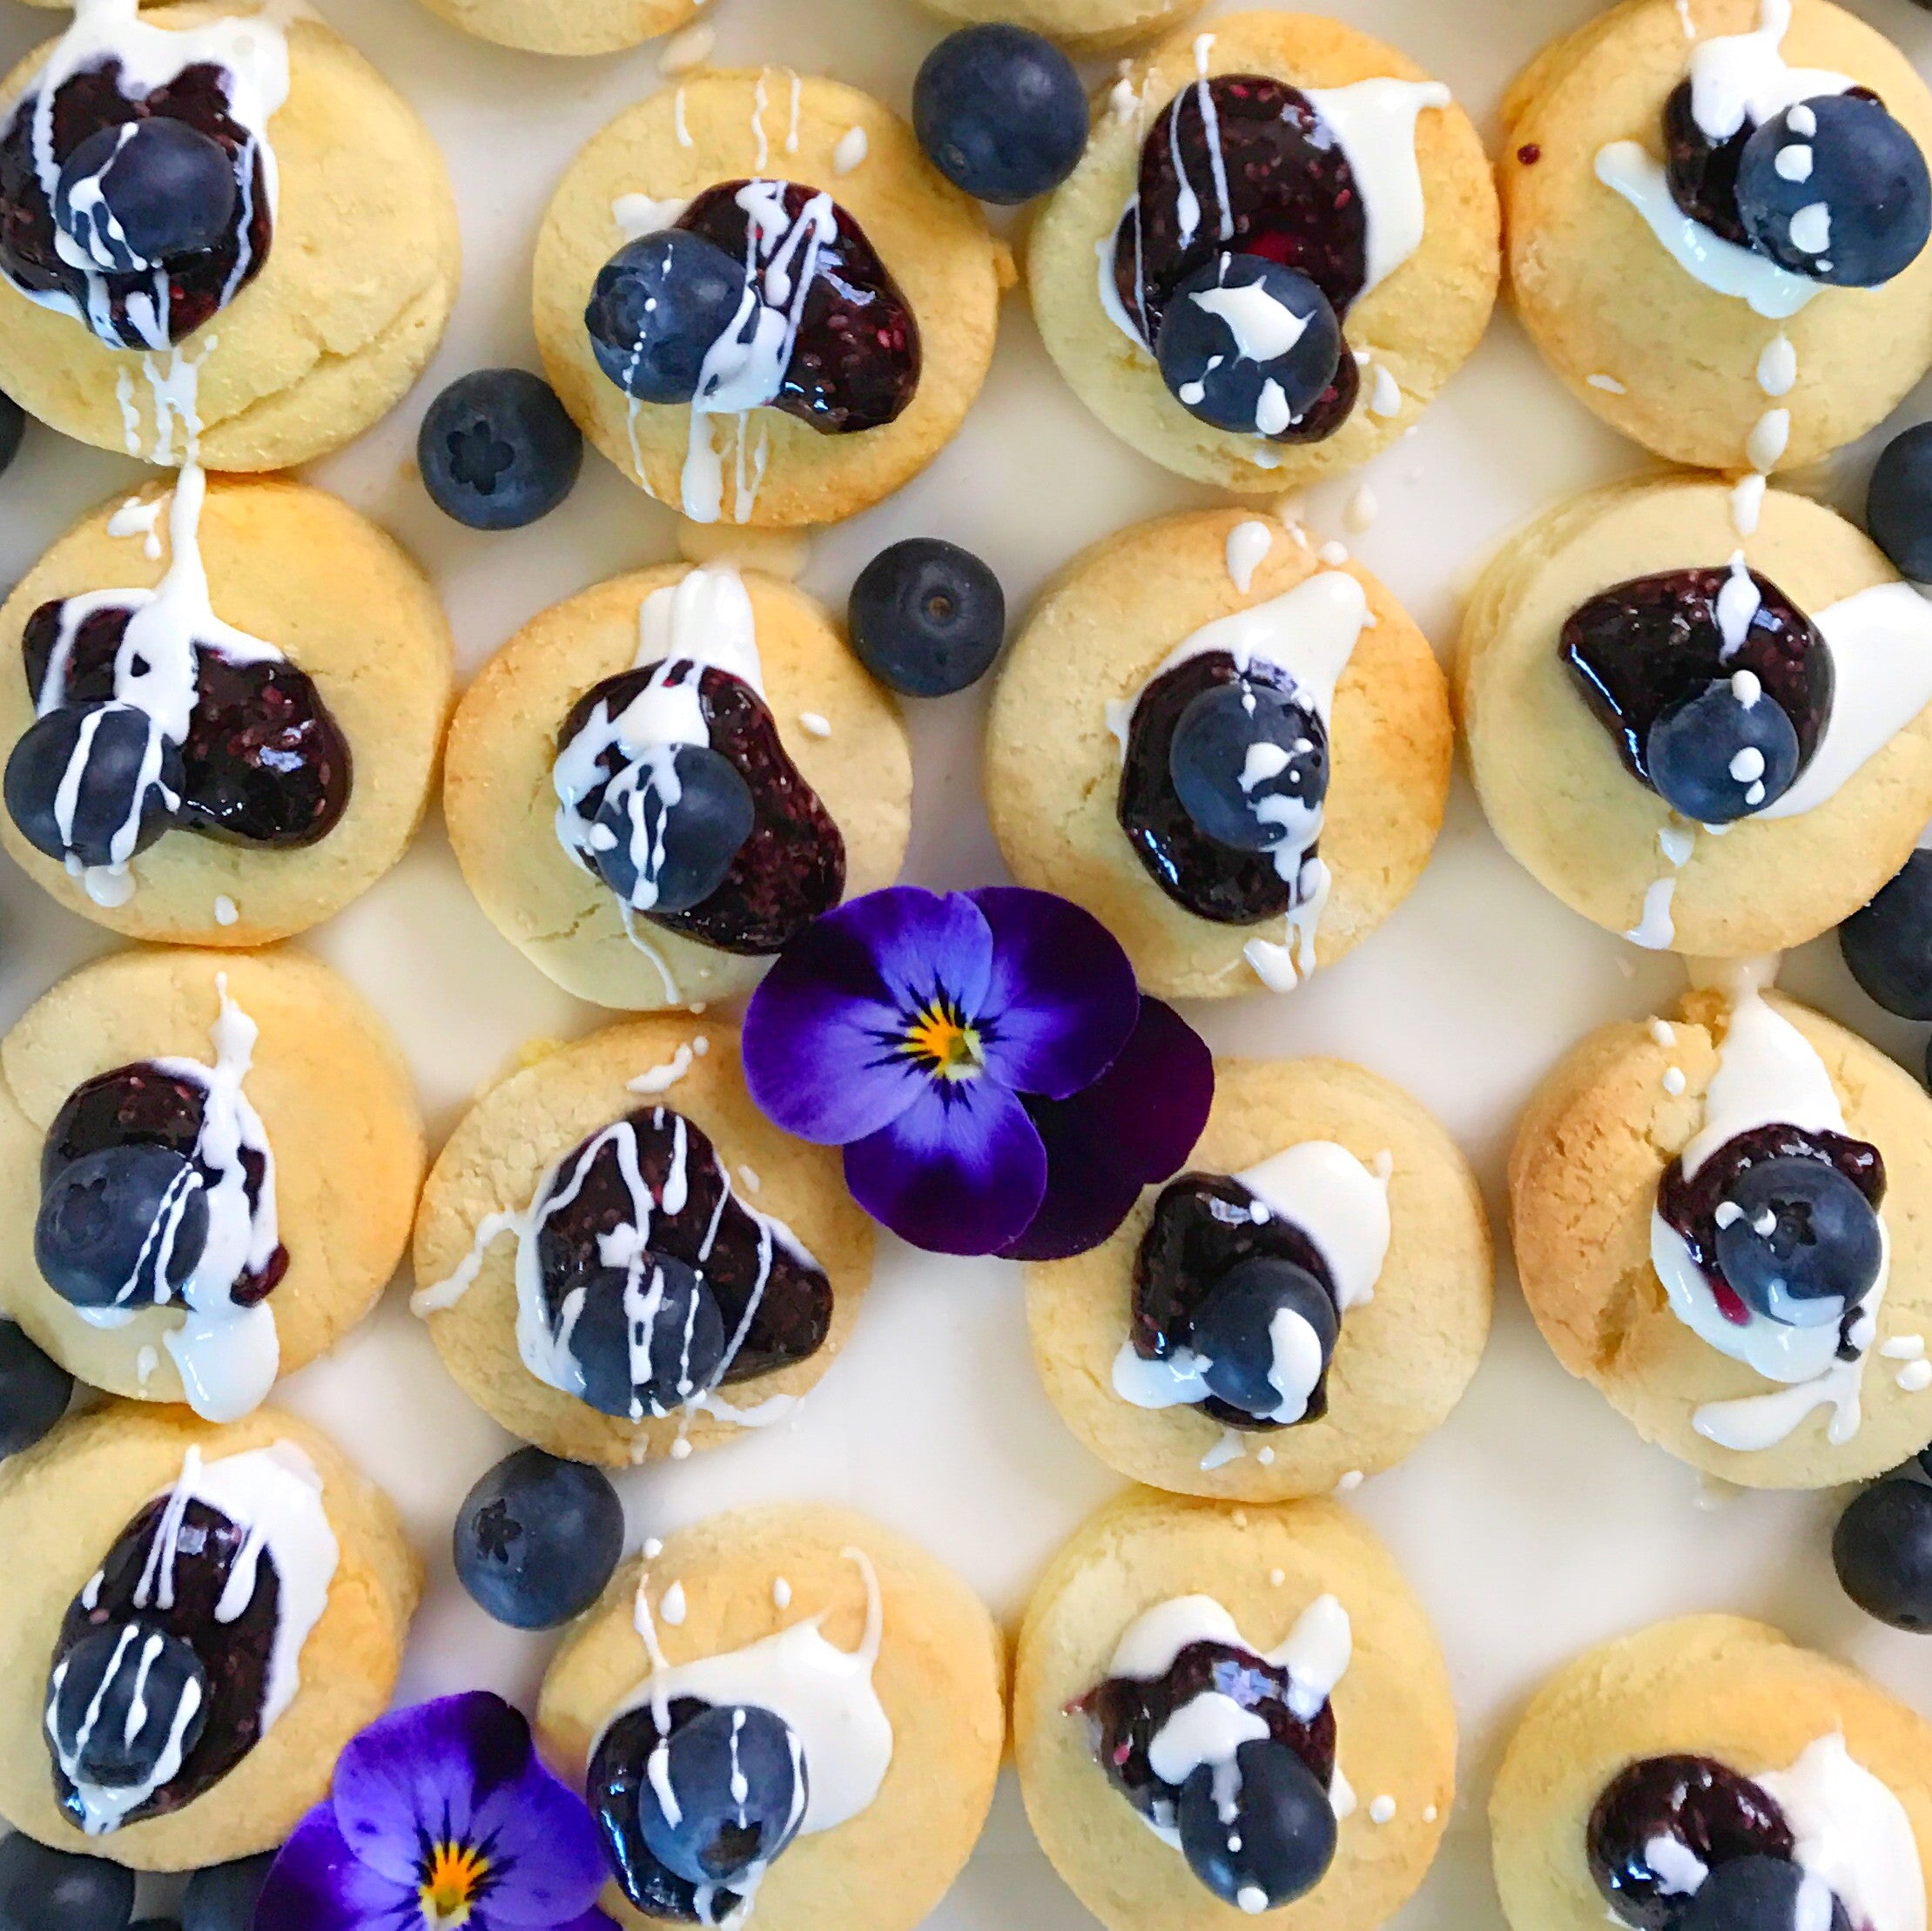 Mini Scones with Blueberry Chia Jam and Fresh Cream (available GF)